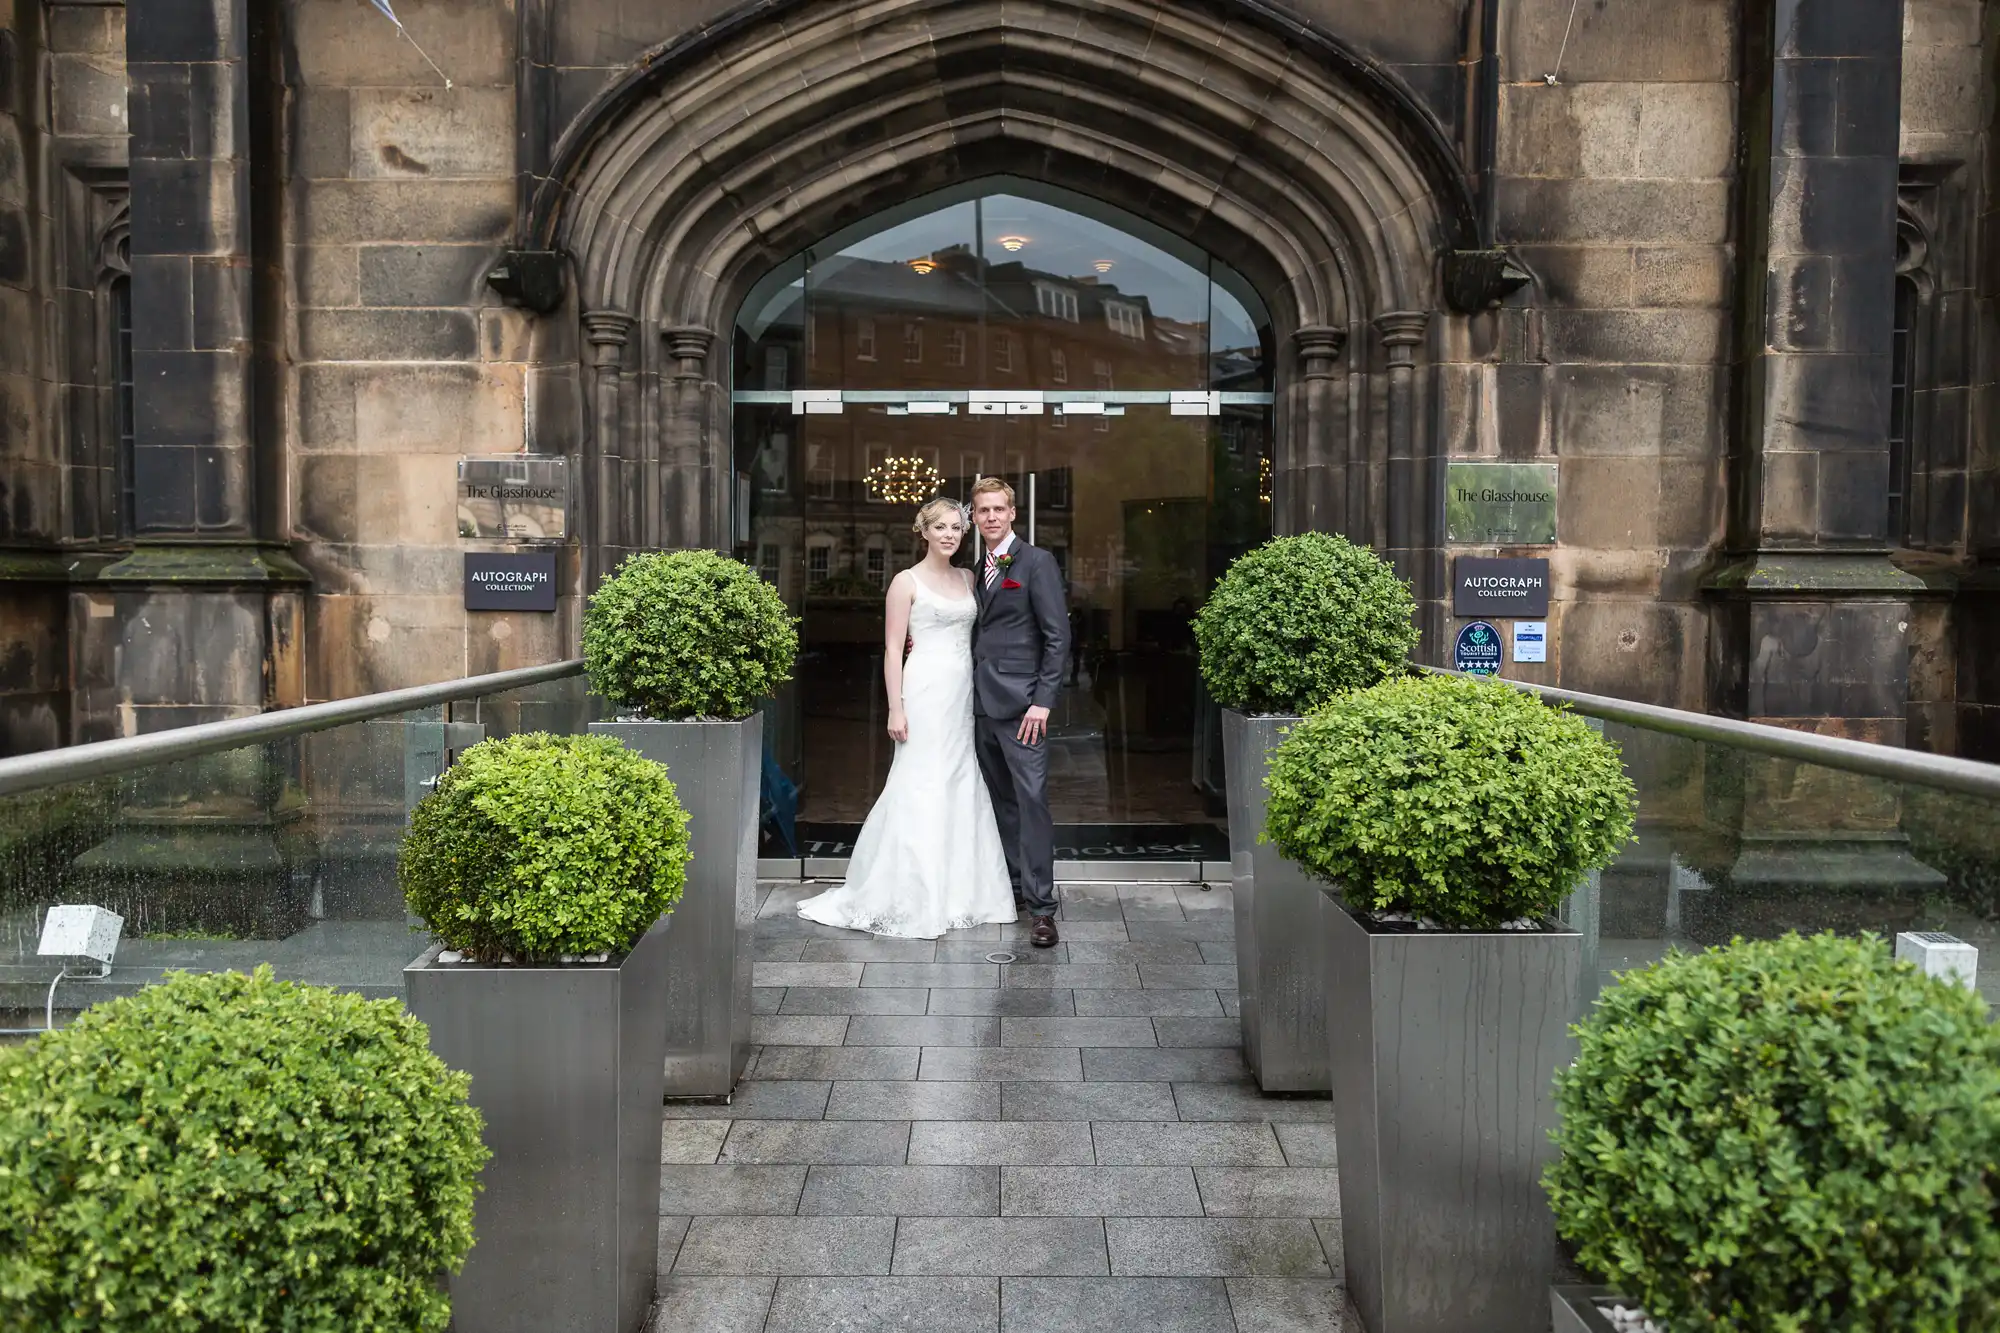 A bride and groom walking out of a church entrance, smiling and holding hands, with topiary plants lining the pathway.